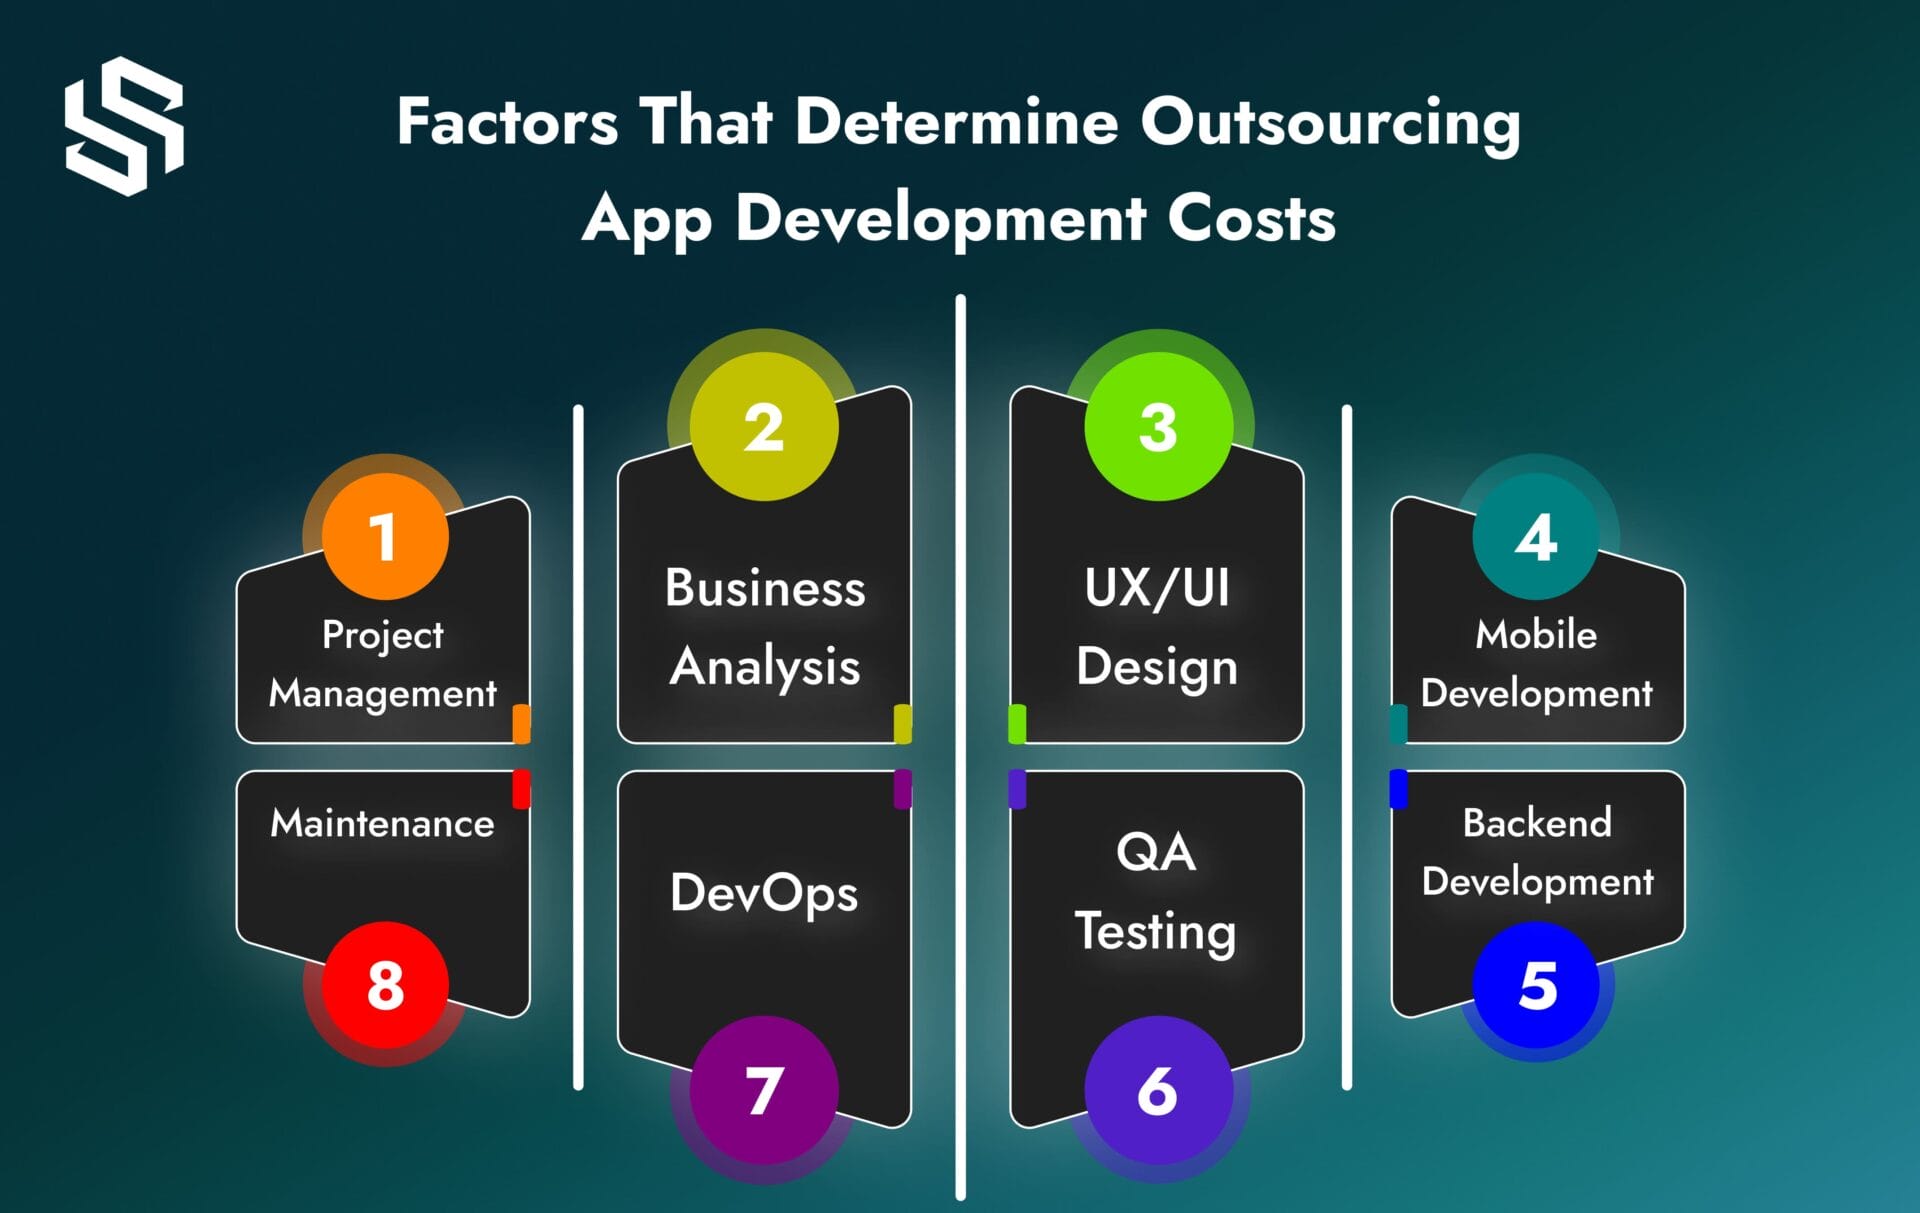 Factors that Determine the Cost of Outsourcing App Development